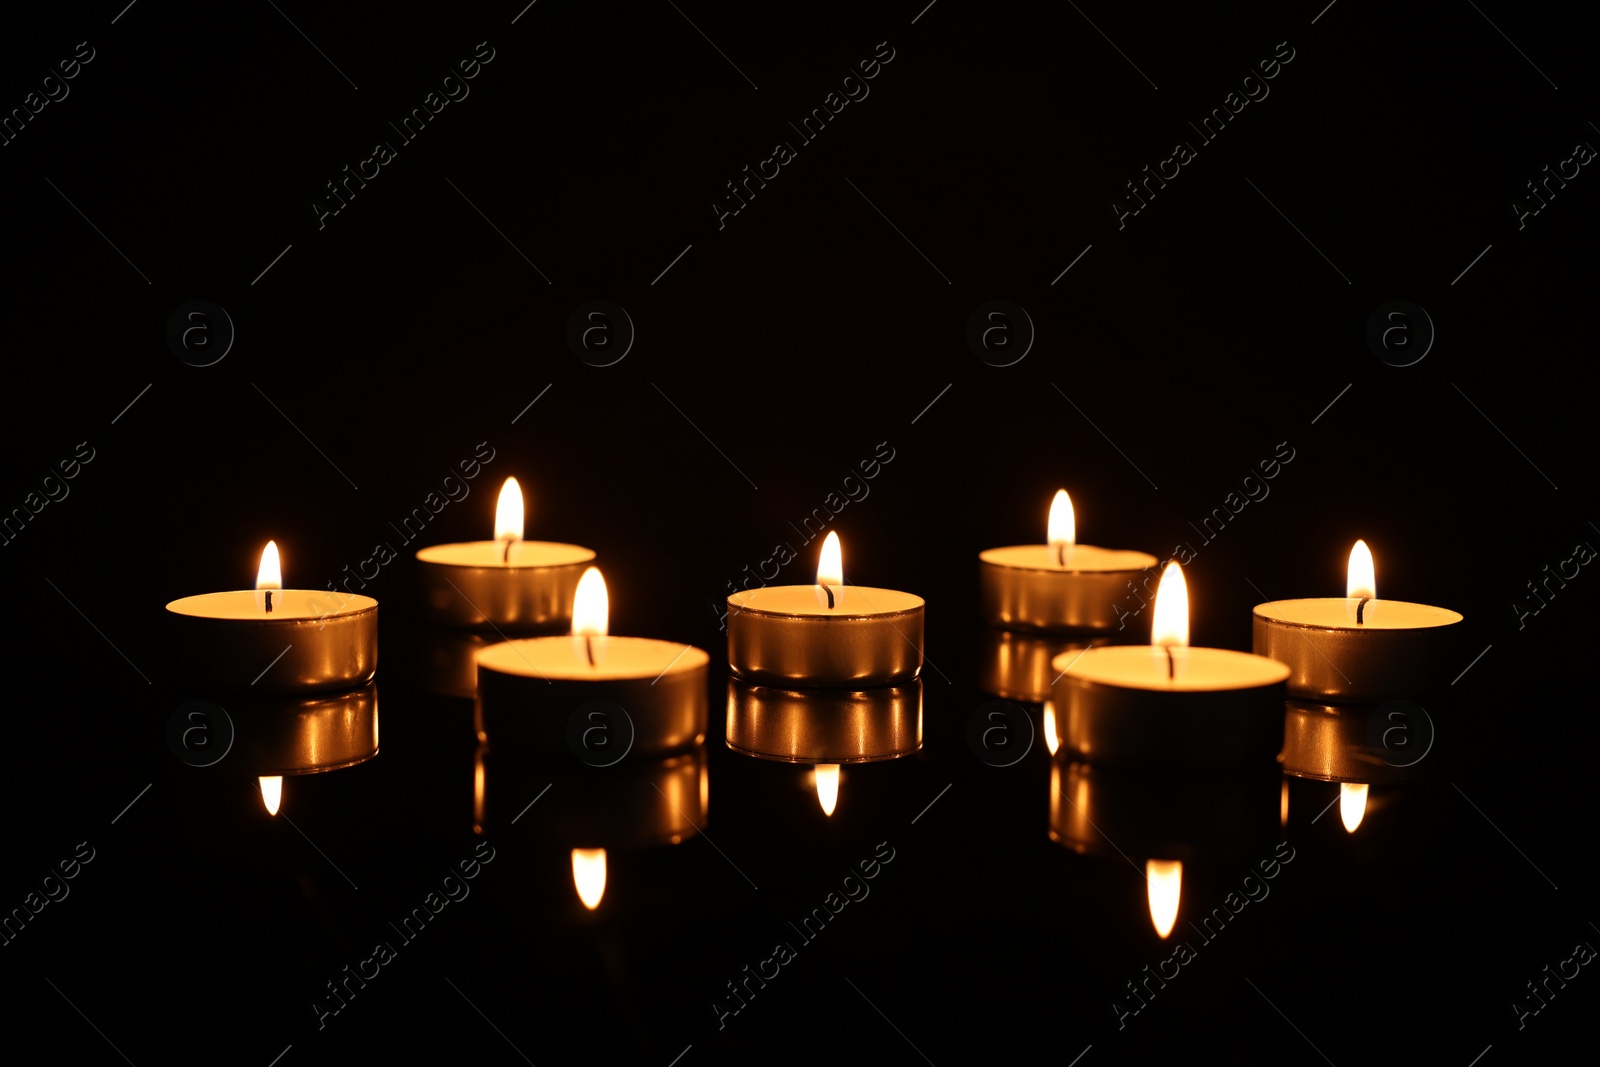 Photo of Burning candles on mirror surface in darkness